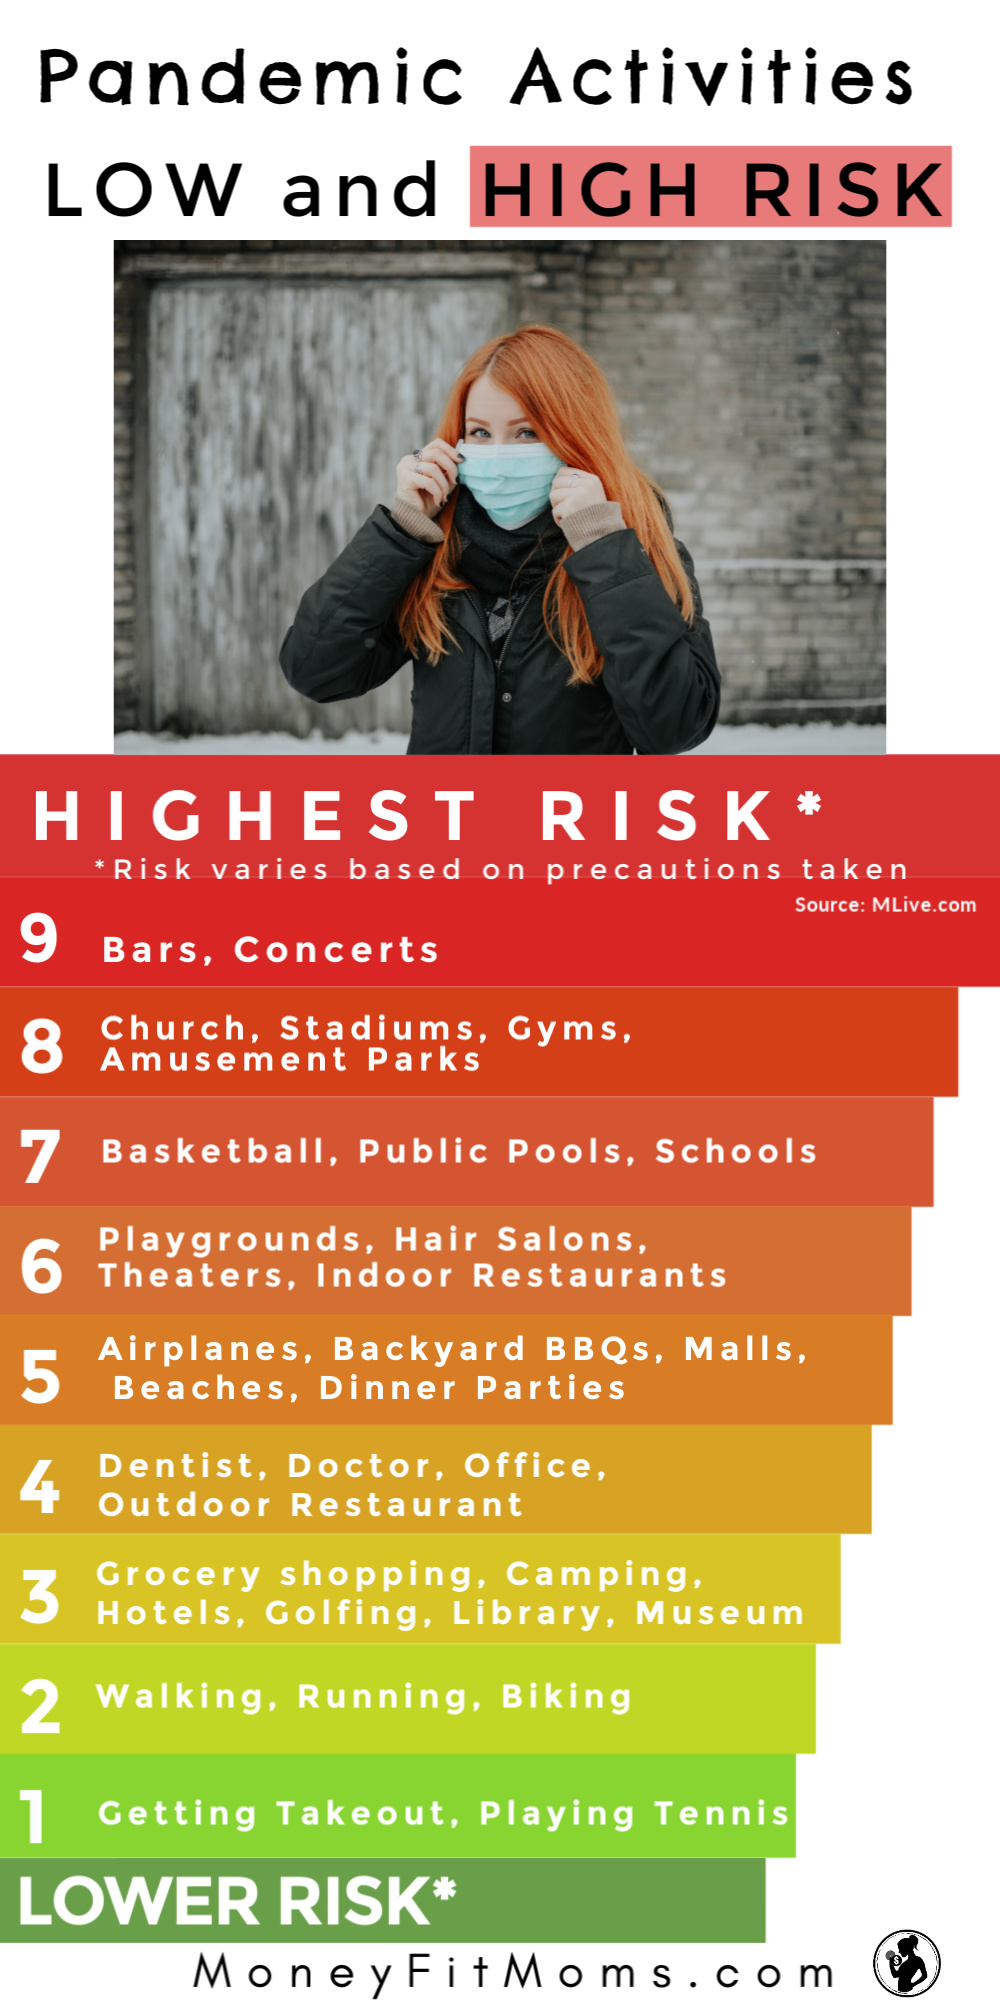 How RISKY Are These Activities in a Pandemic? TOP 5 RISK FACTORS